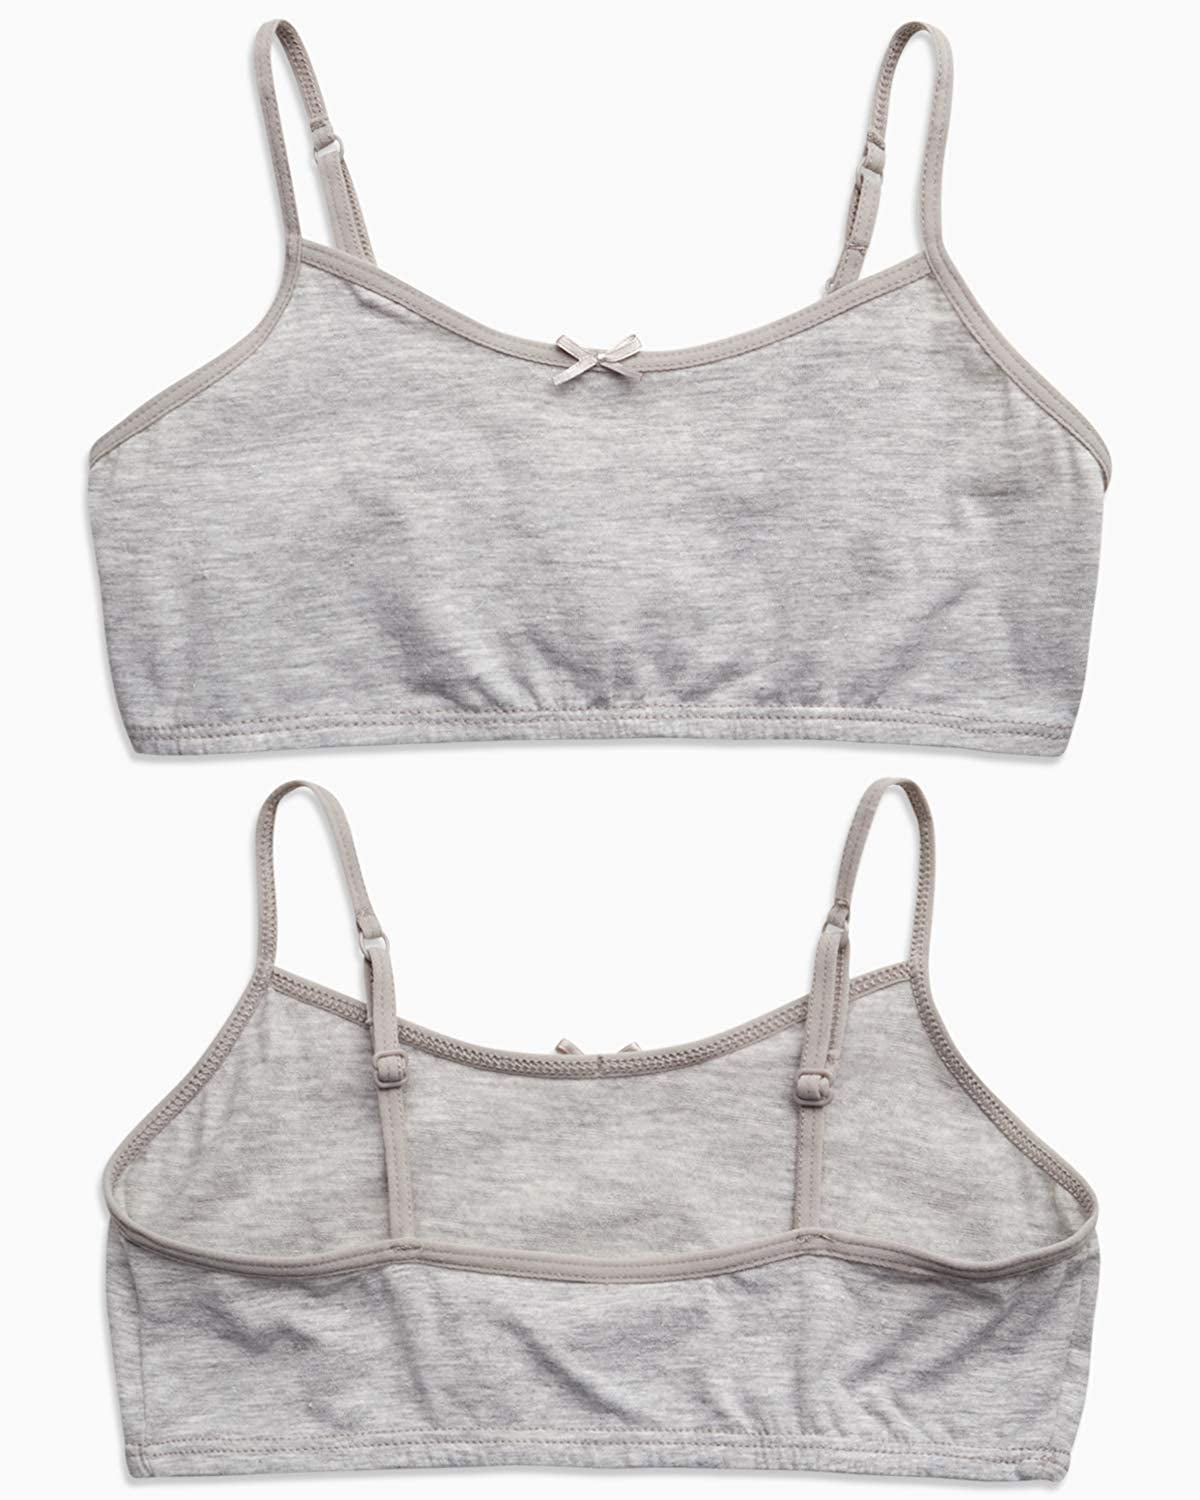 Buy D'chica Tube Bralettes for Teenager Girls Grey and Skin Feisty (Pack of  2) online